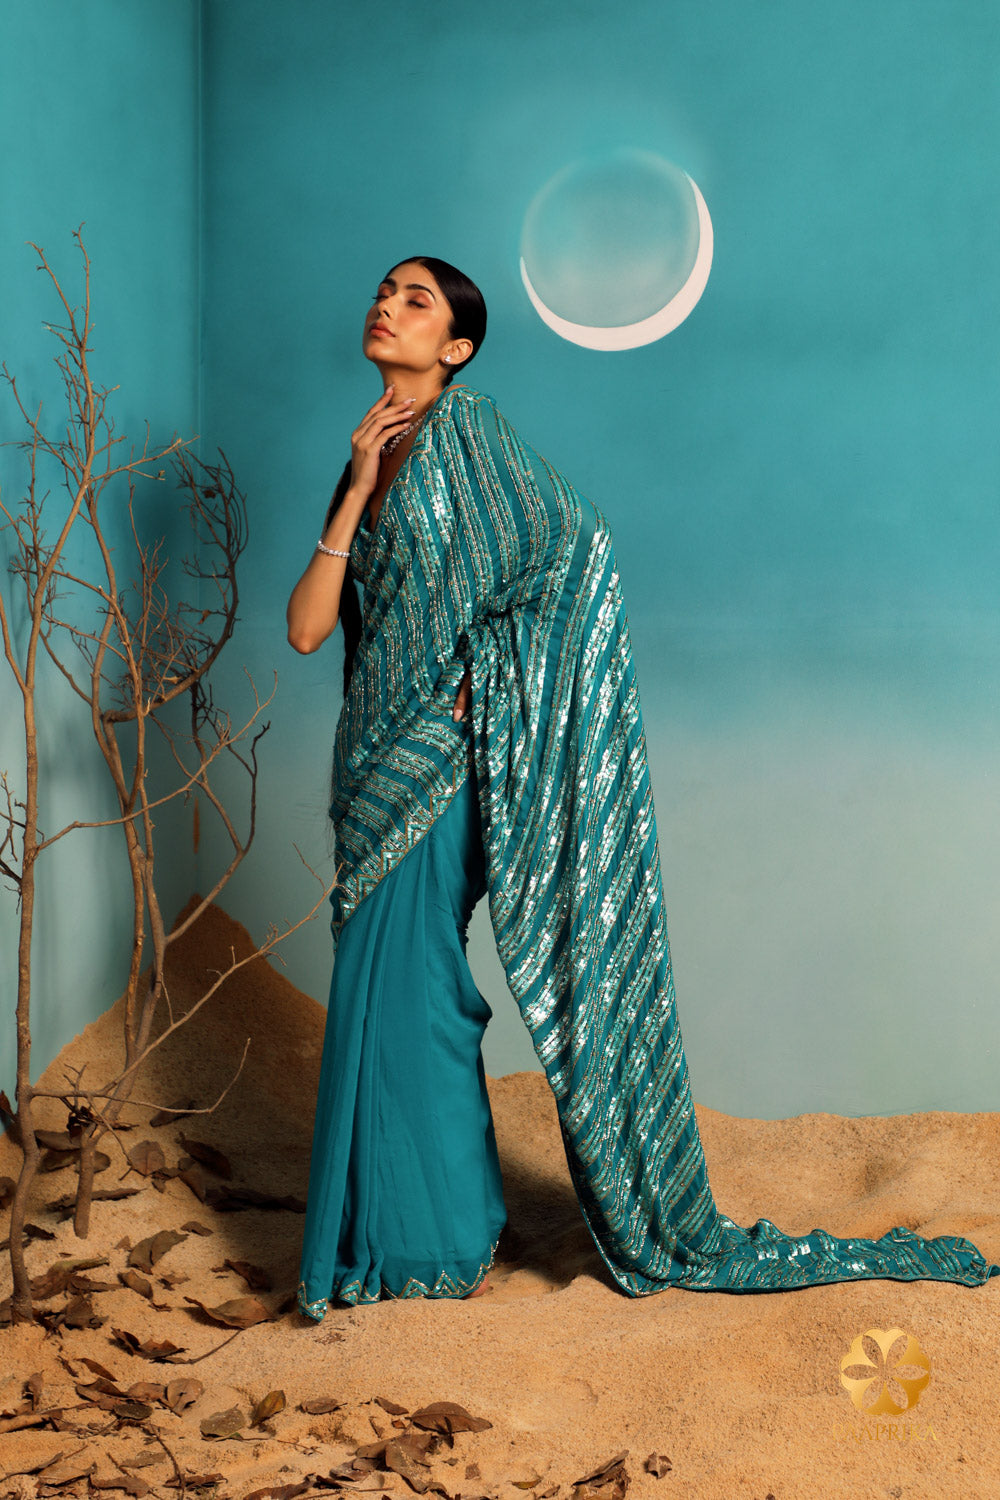 Exquisite teal pure georgette saree with intricate triangular pattern embroidery using sequins and cut dana.